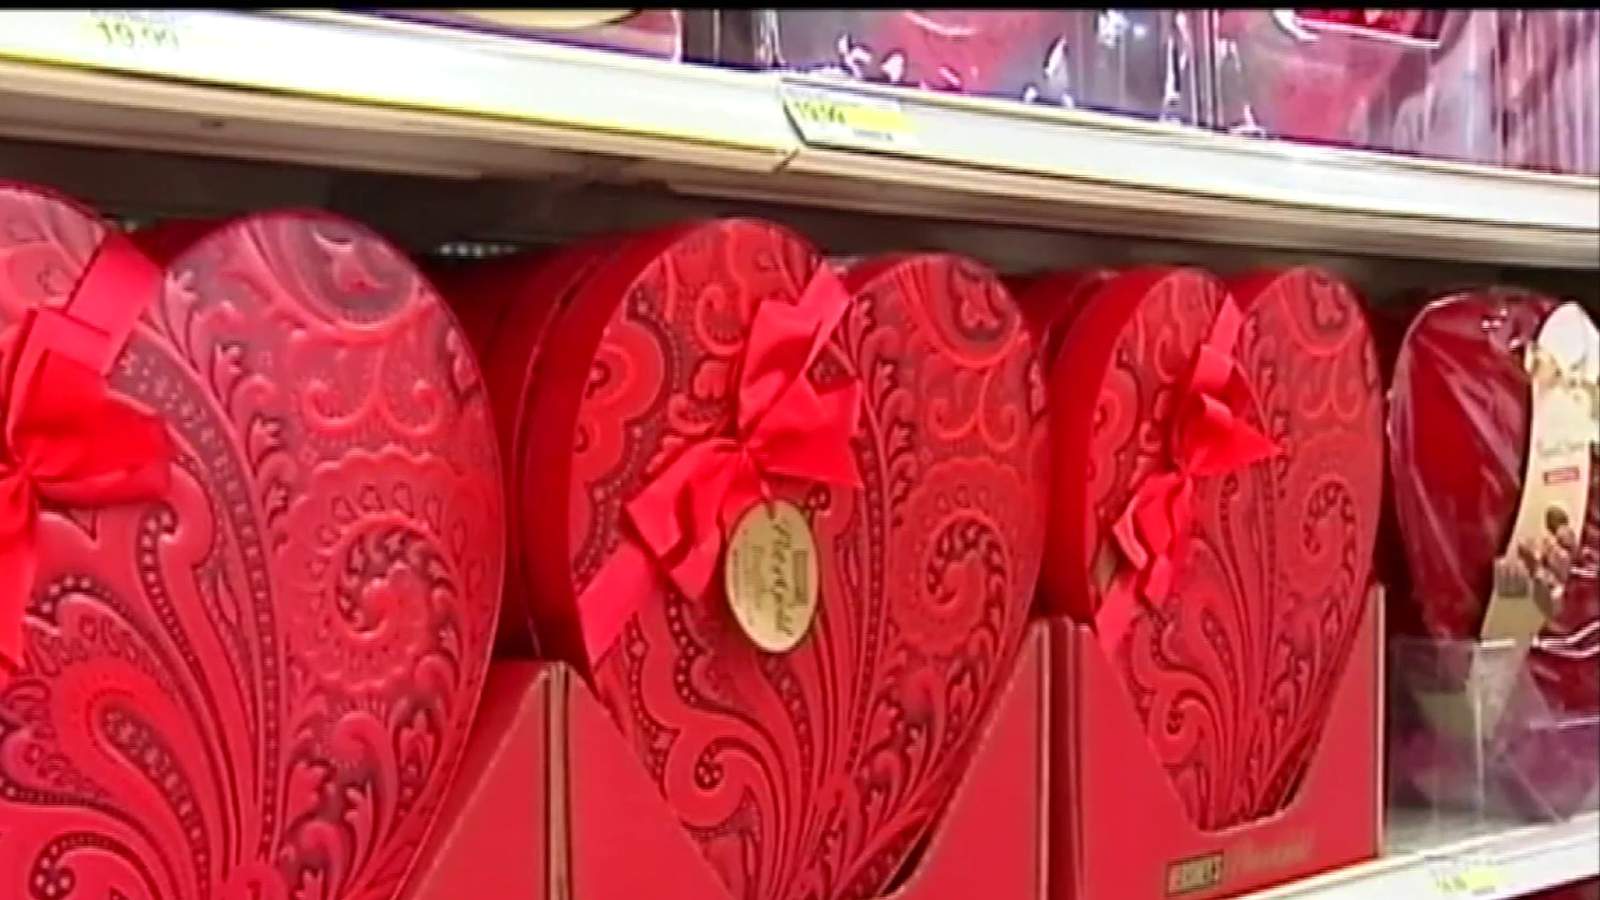 Valentine’s Day prompts romance, flower delivery scam alert